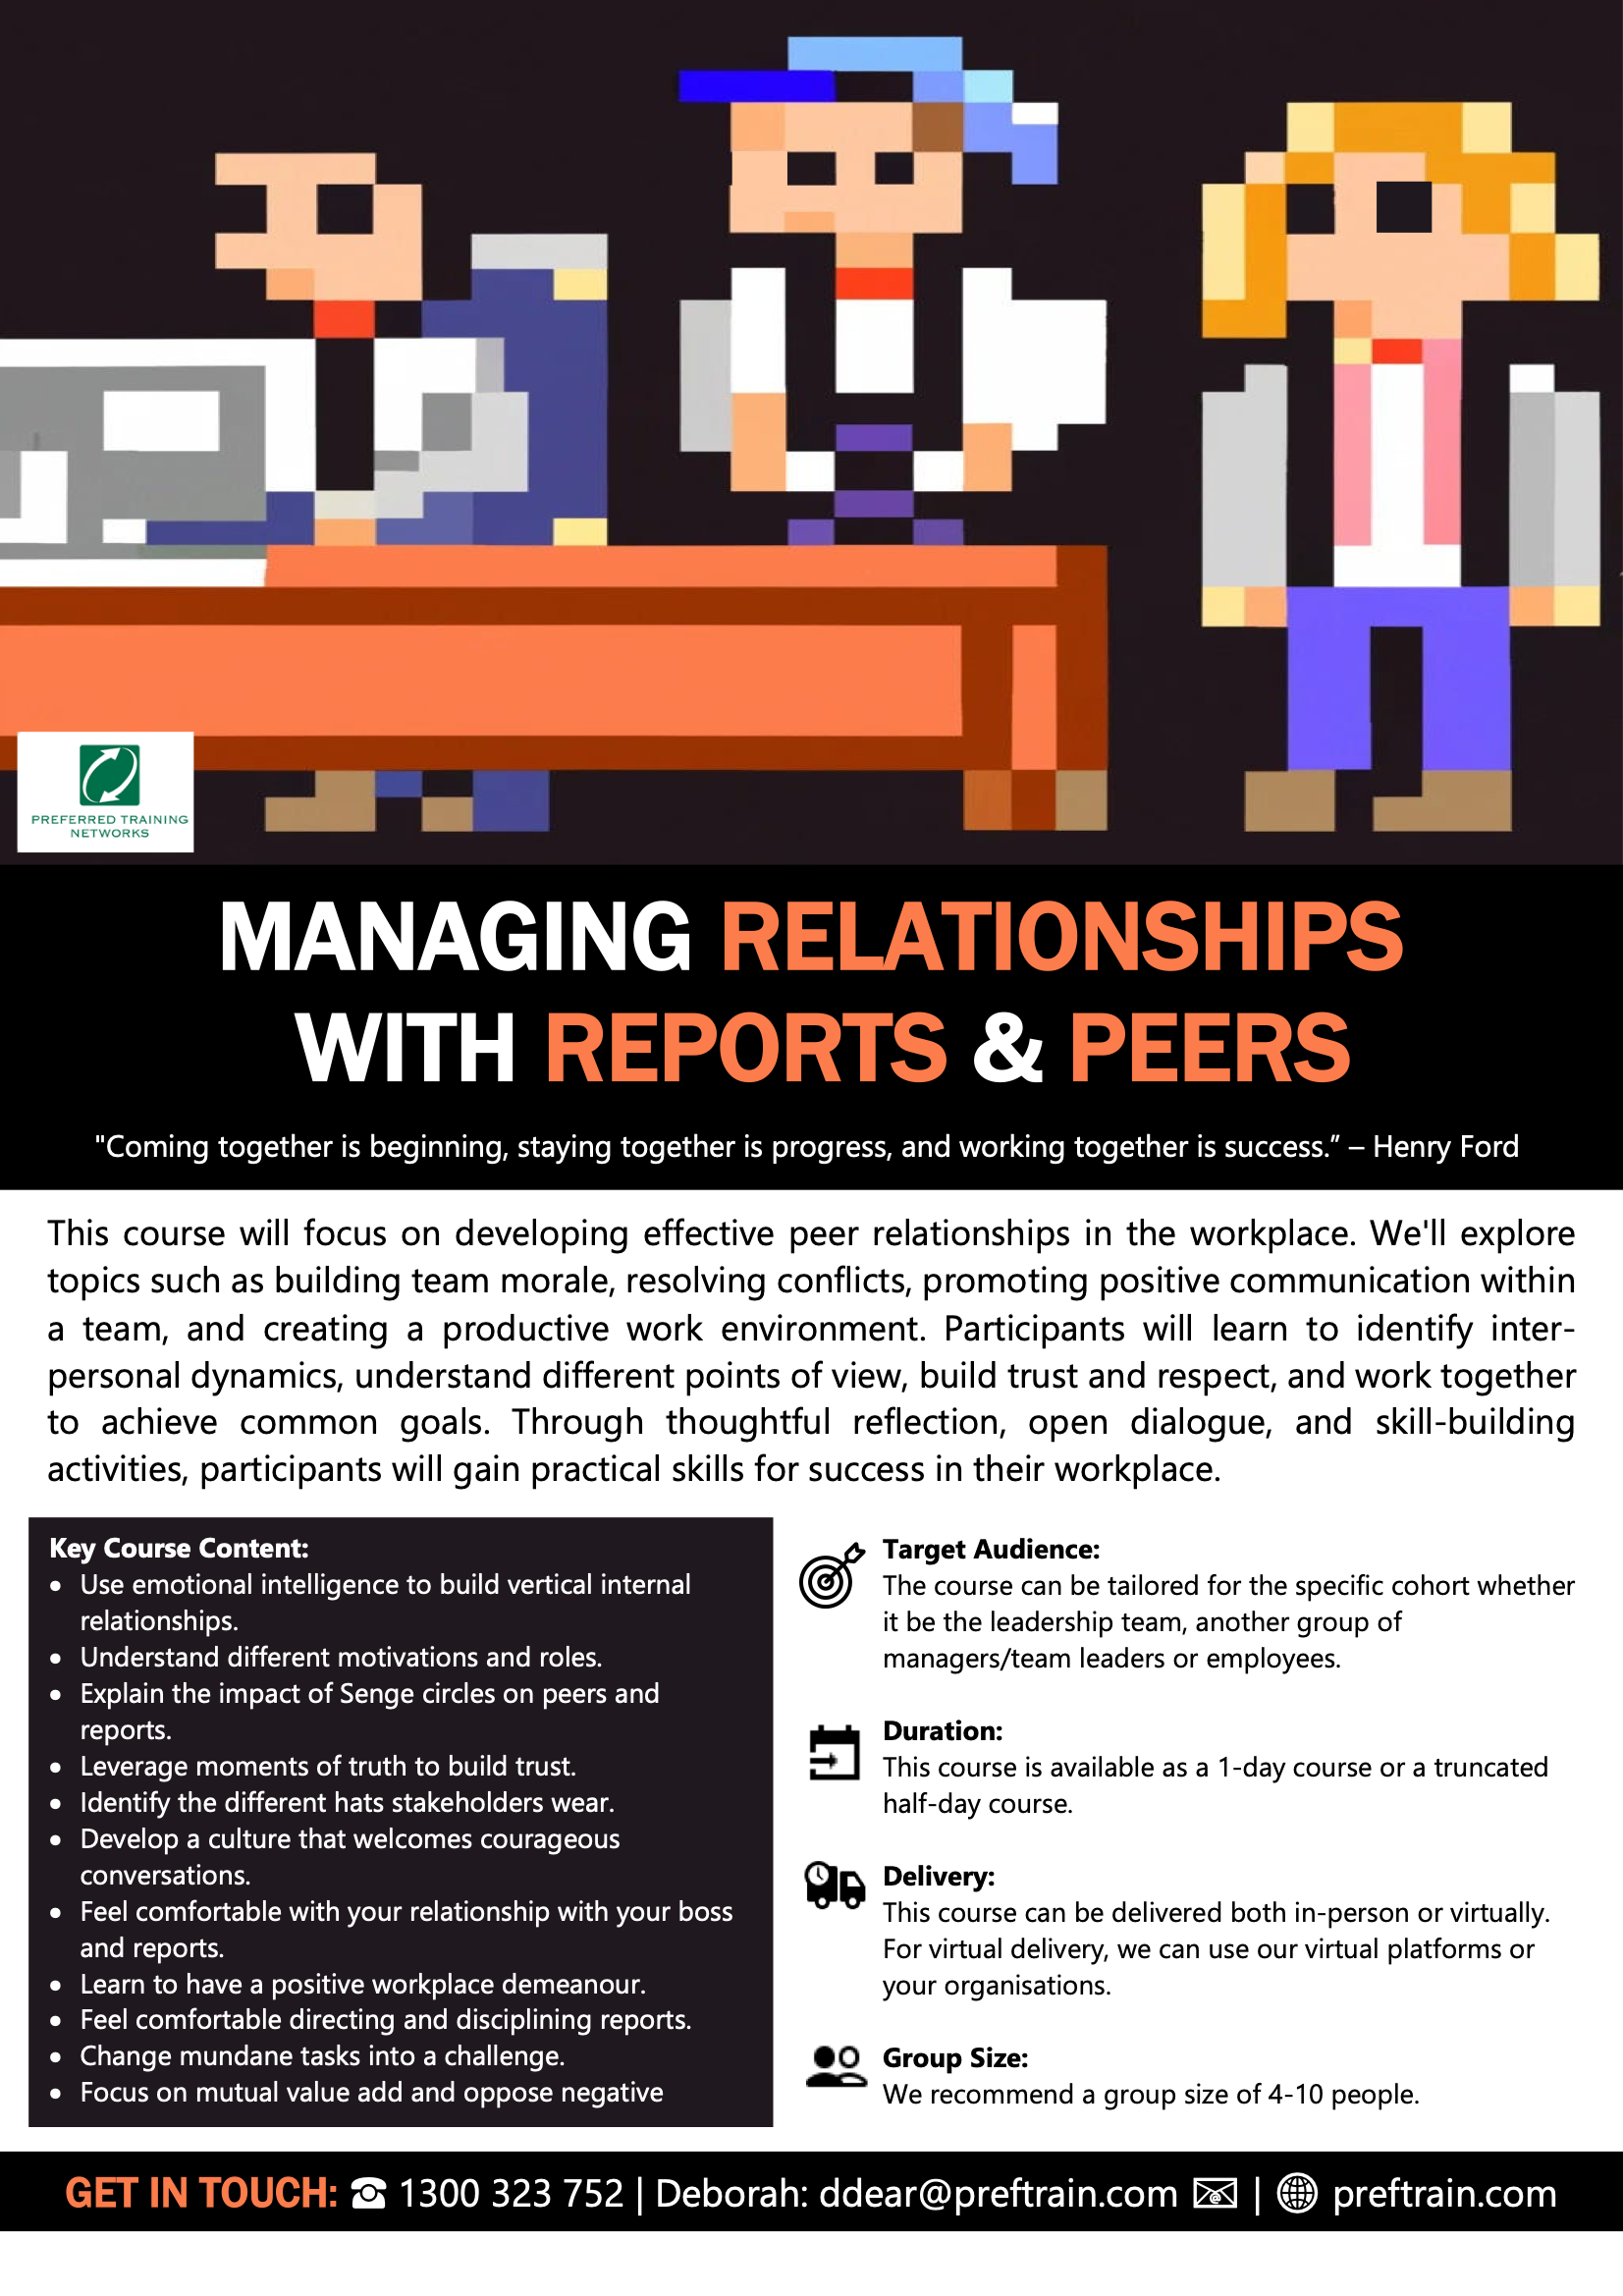 Managing Relationships With Reports & Peers